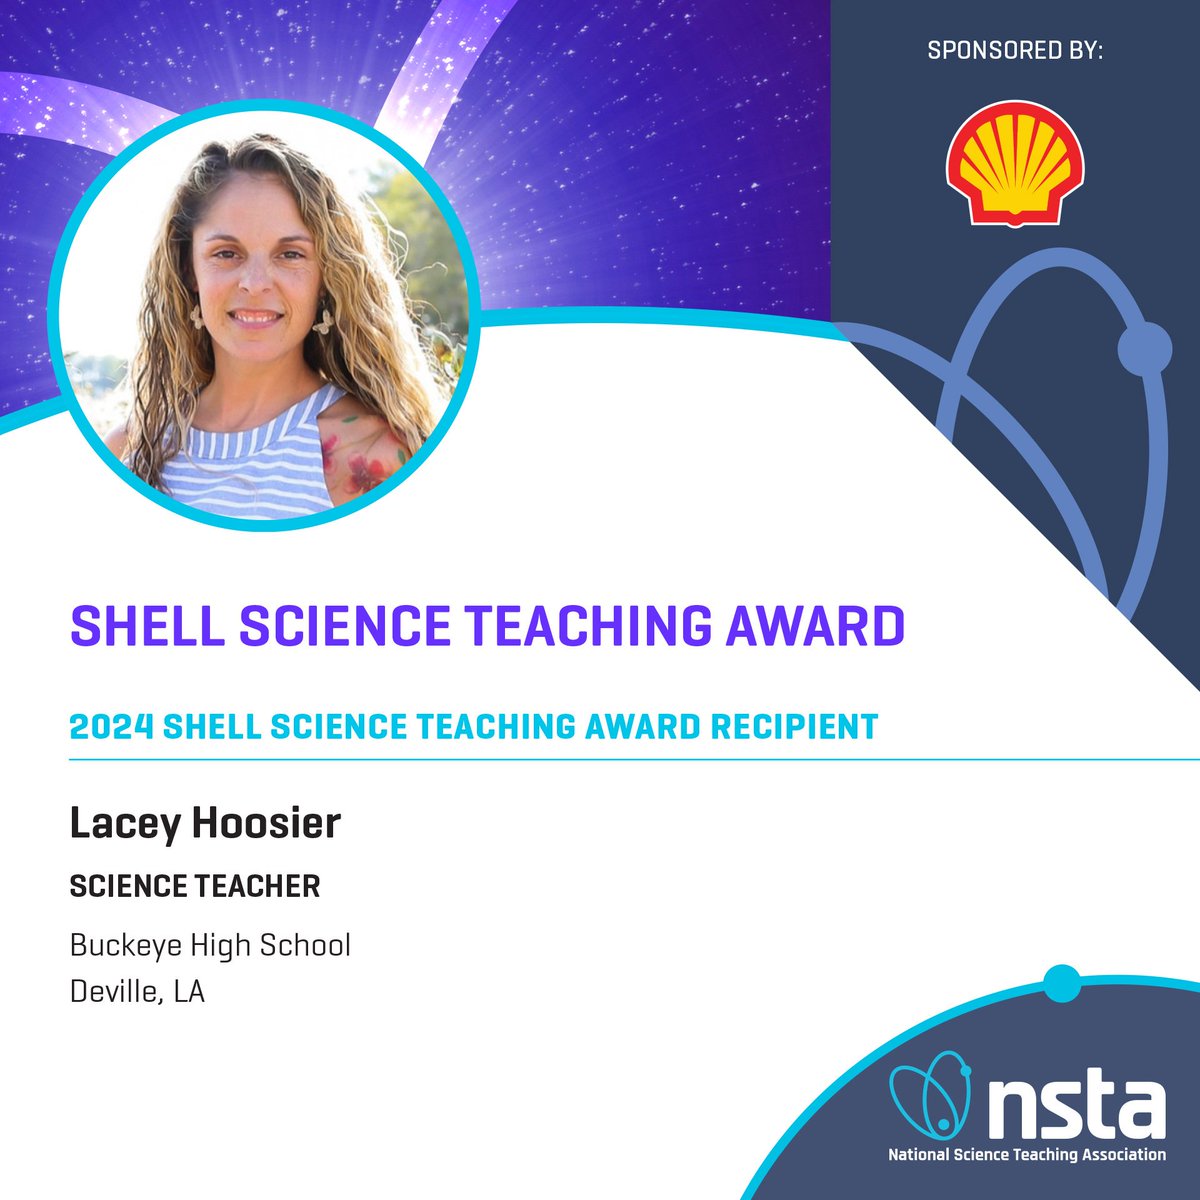 Join NSTA in honoring this year's winner of the 2024 Shell Science Teaching Award! This award recognizes just one outstanding classroom teacher (grades K–12) who has positively influenced their students, school, and the community through exemplary science teaching. Congrats!